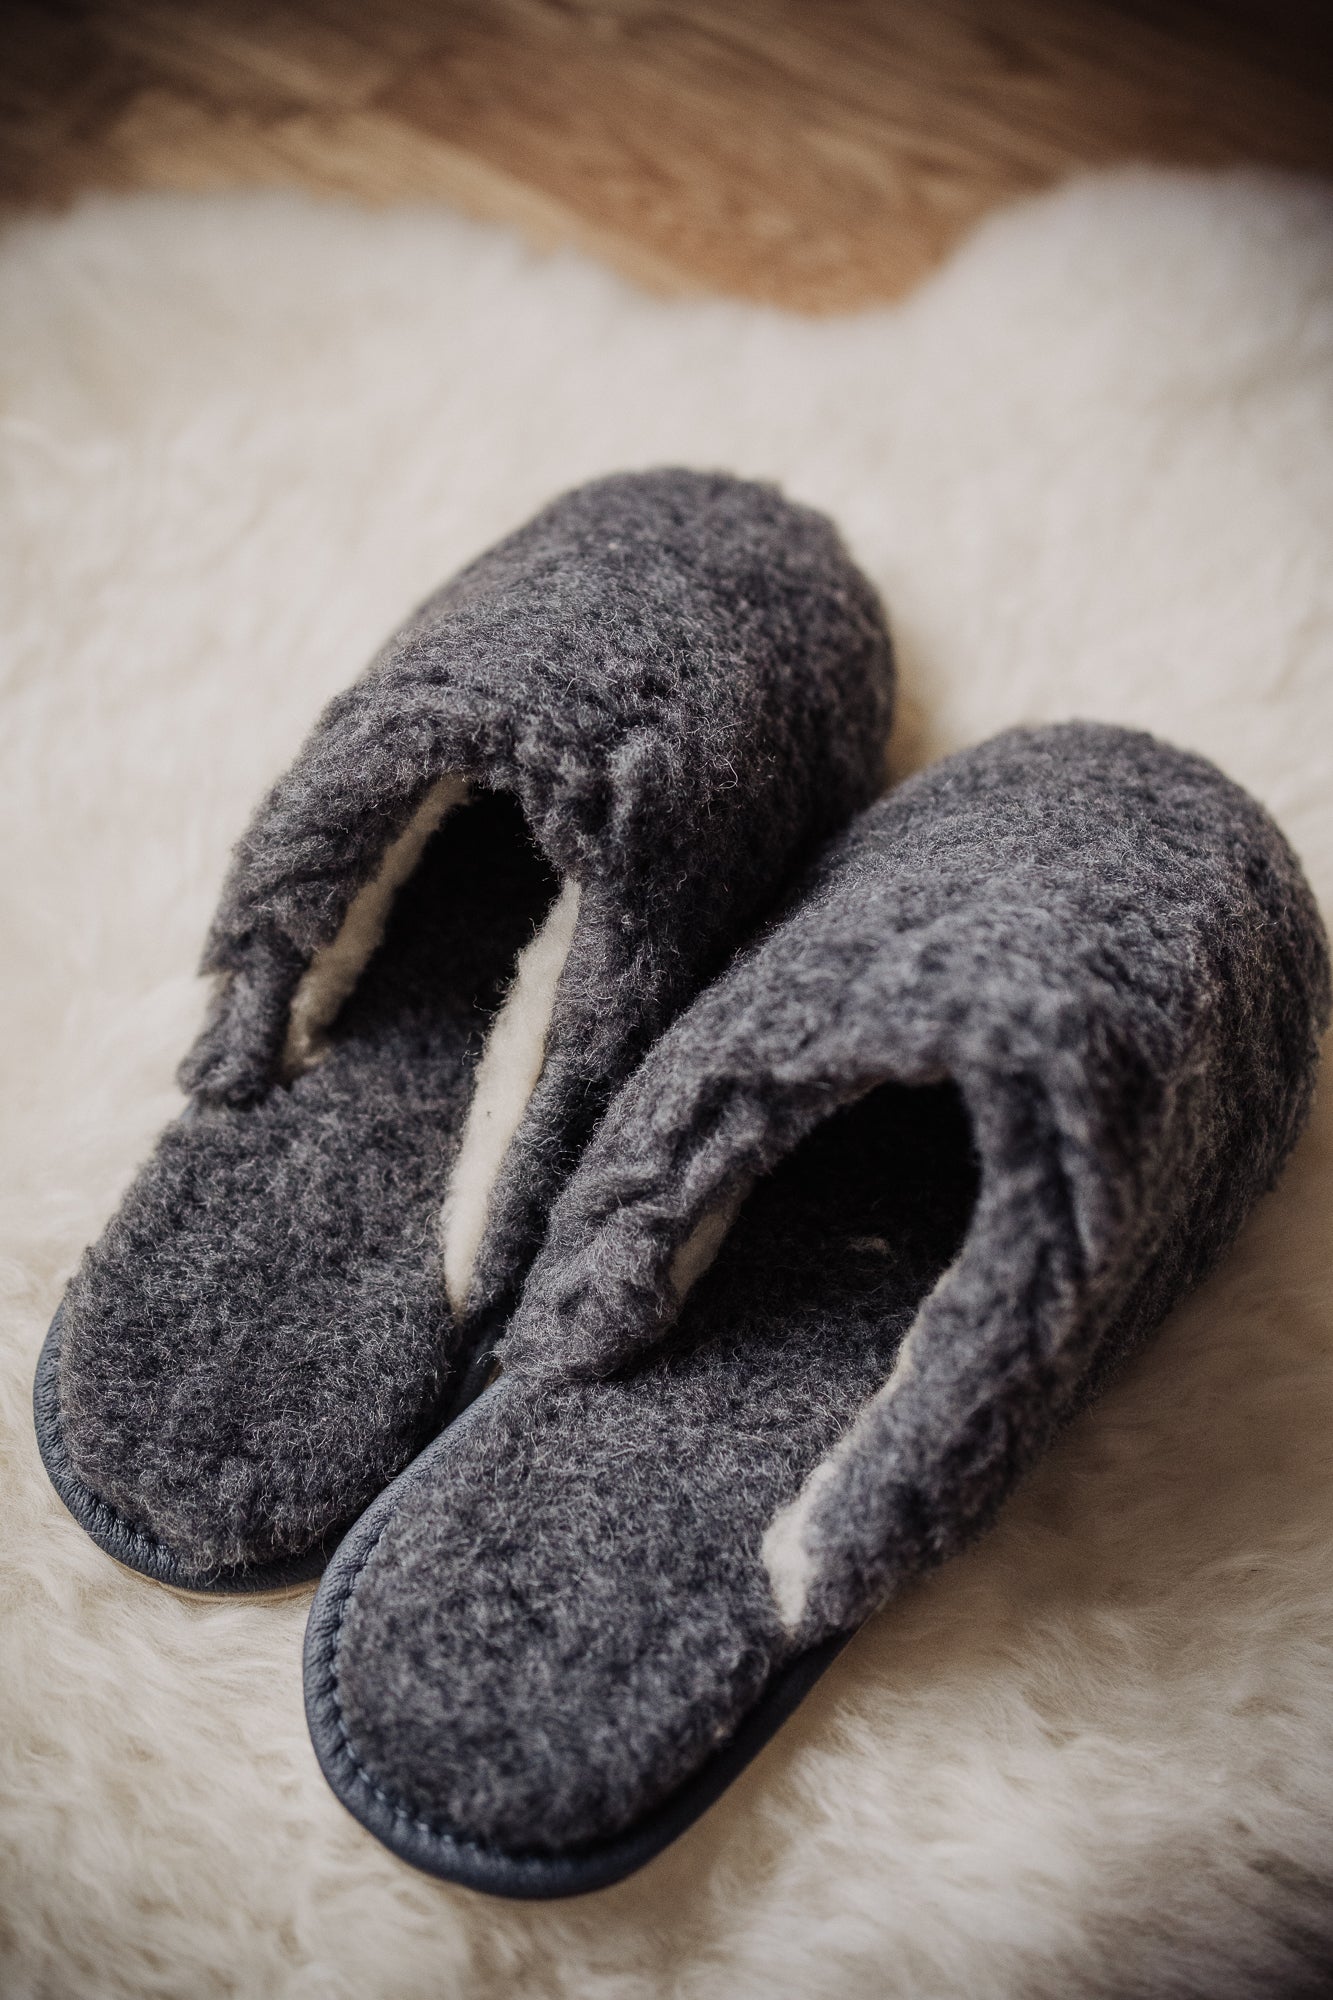 slip-on slippers, grey wool slippers, men's footwear, house shoes, lightweight slippers, natural fibre, rubber sole, comfortable house footwear, warm and cosy, gift for him, bamboshe footwear